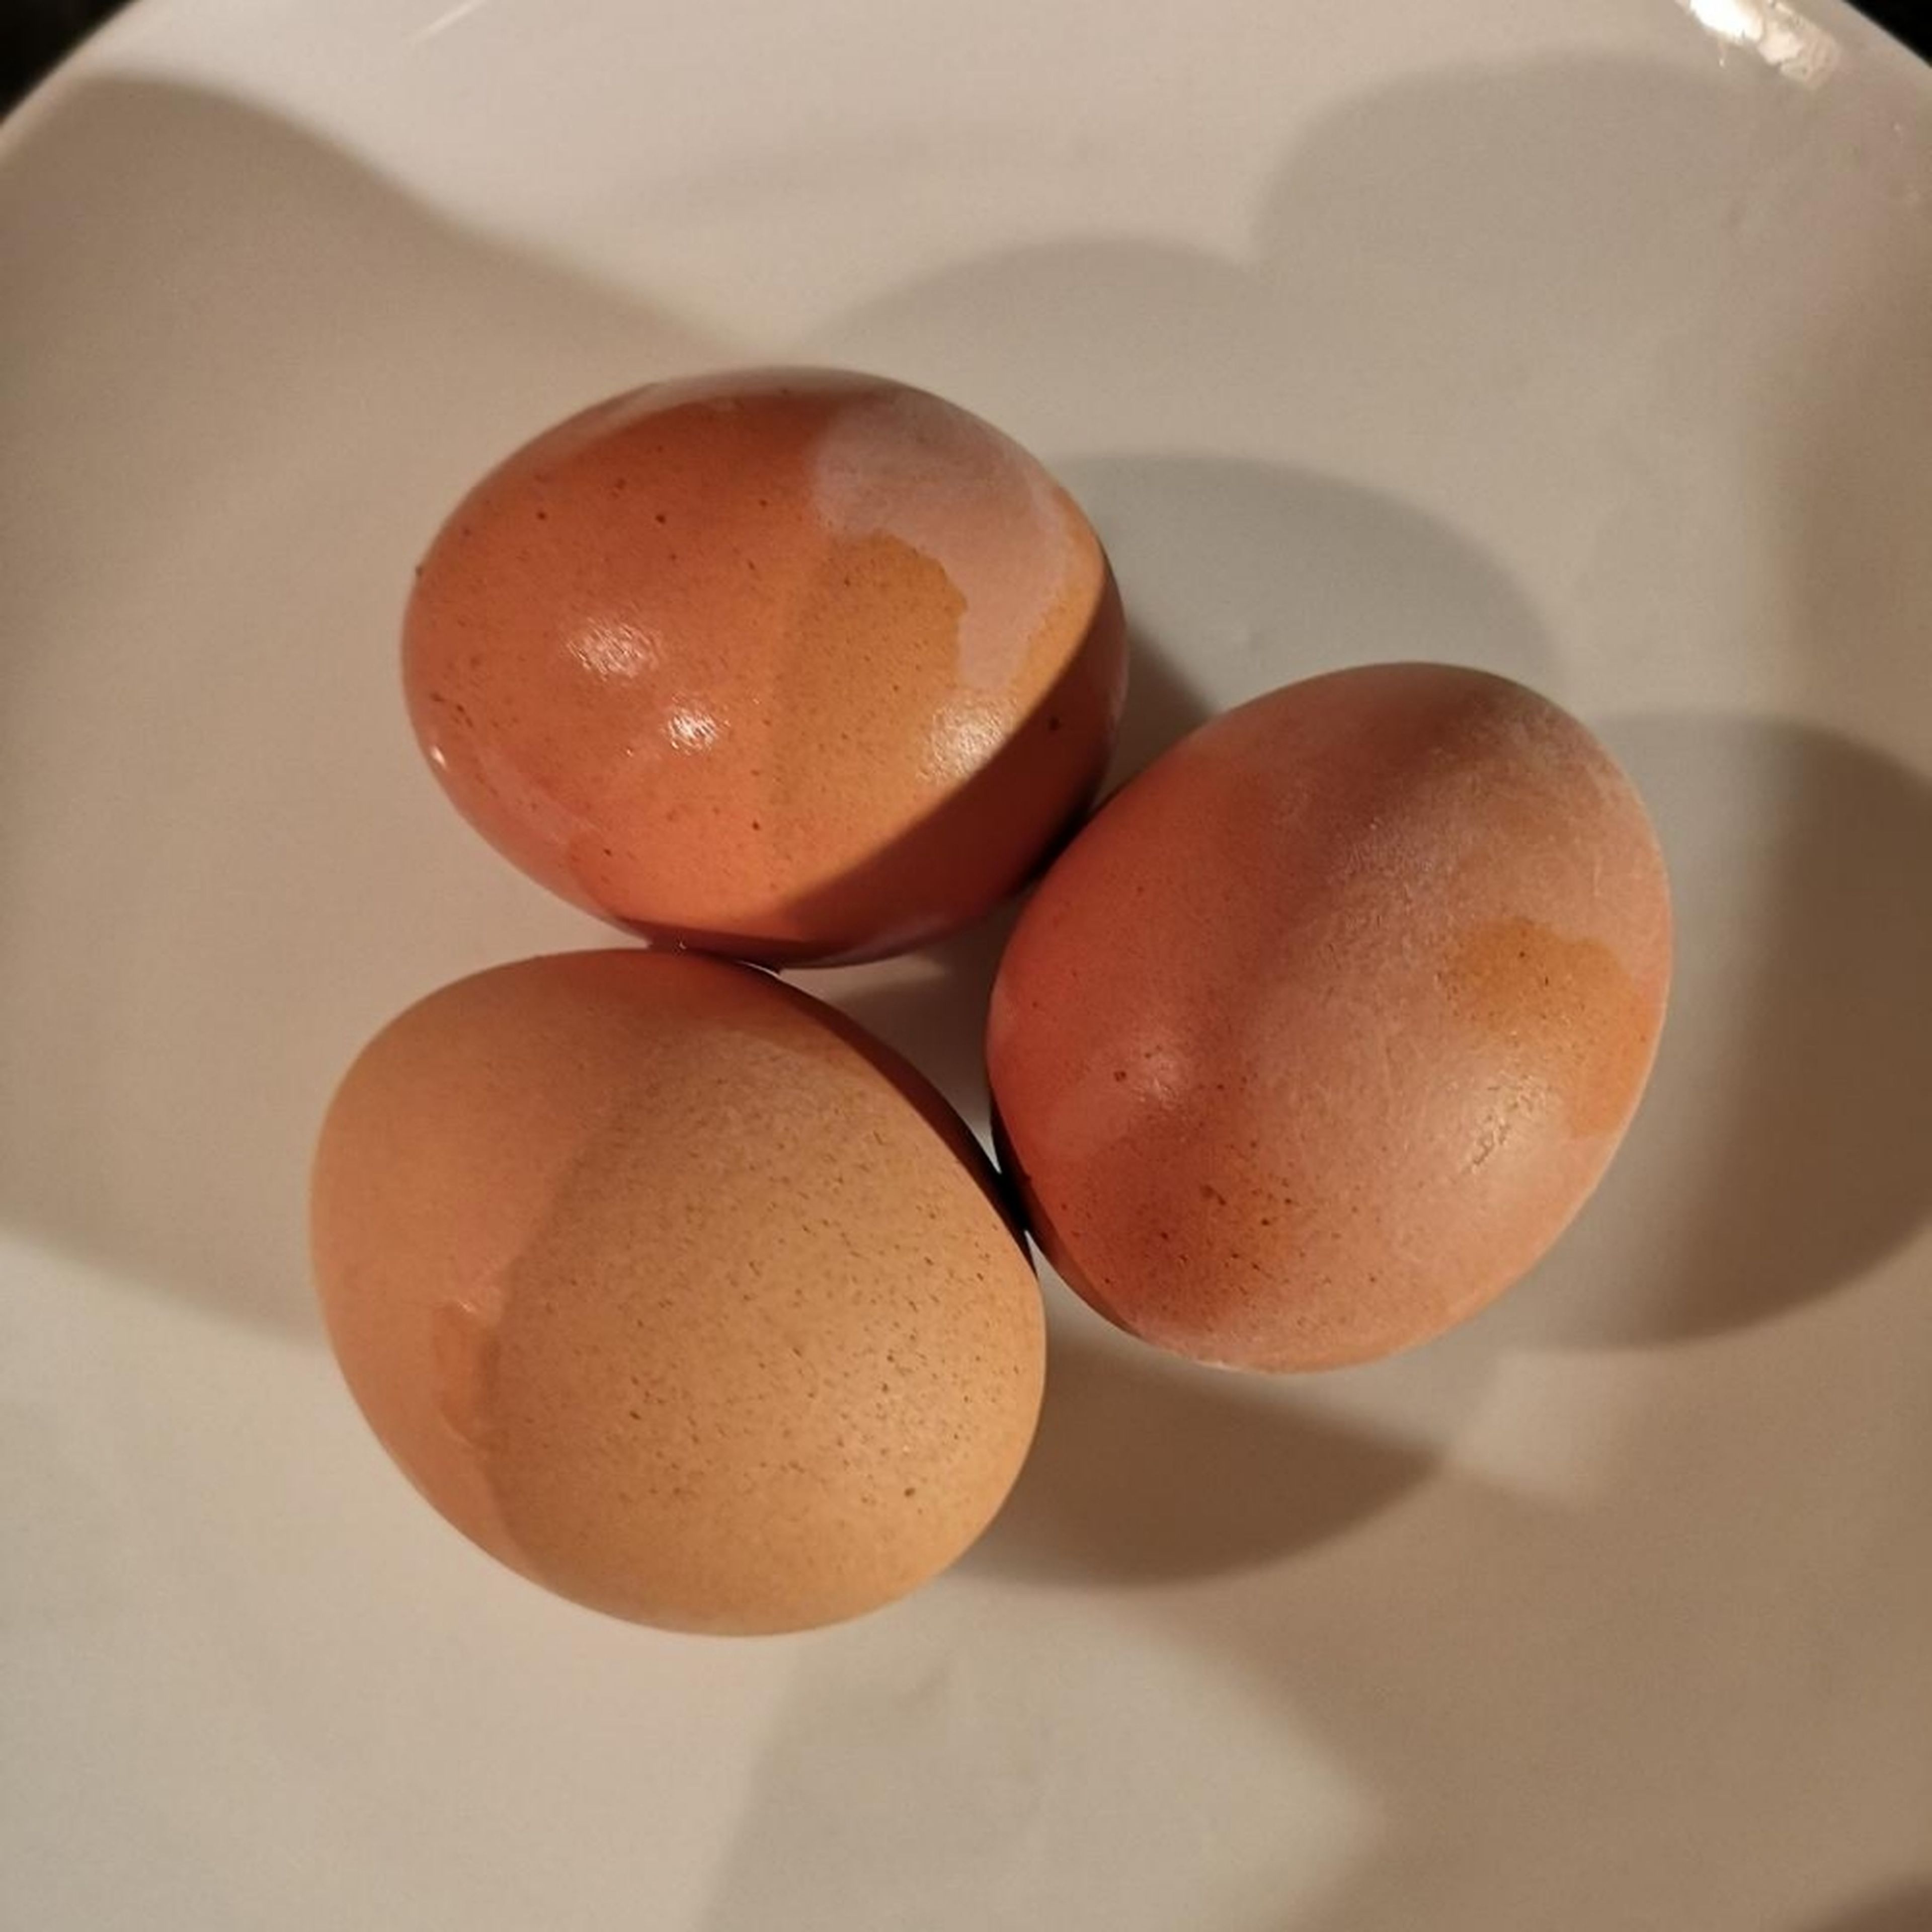 Hard boil 3 eggs. It takes 7 minutes to hard boil perfect eggs from the moment the water starts boiling. Pour 700 ml of water into a pot, place the eggs in, switch on mjdium heat and wait for the water to start boiling, put the timer for 7 min.